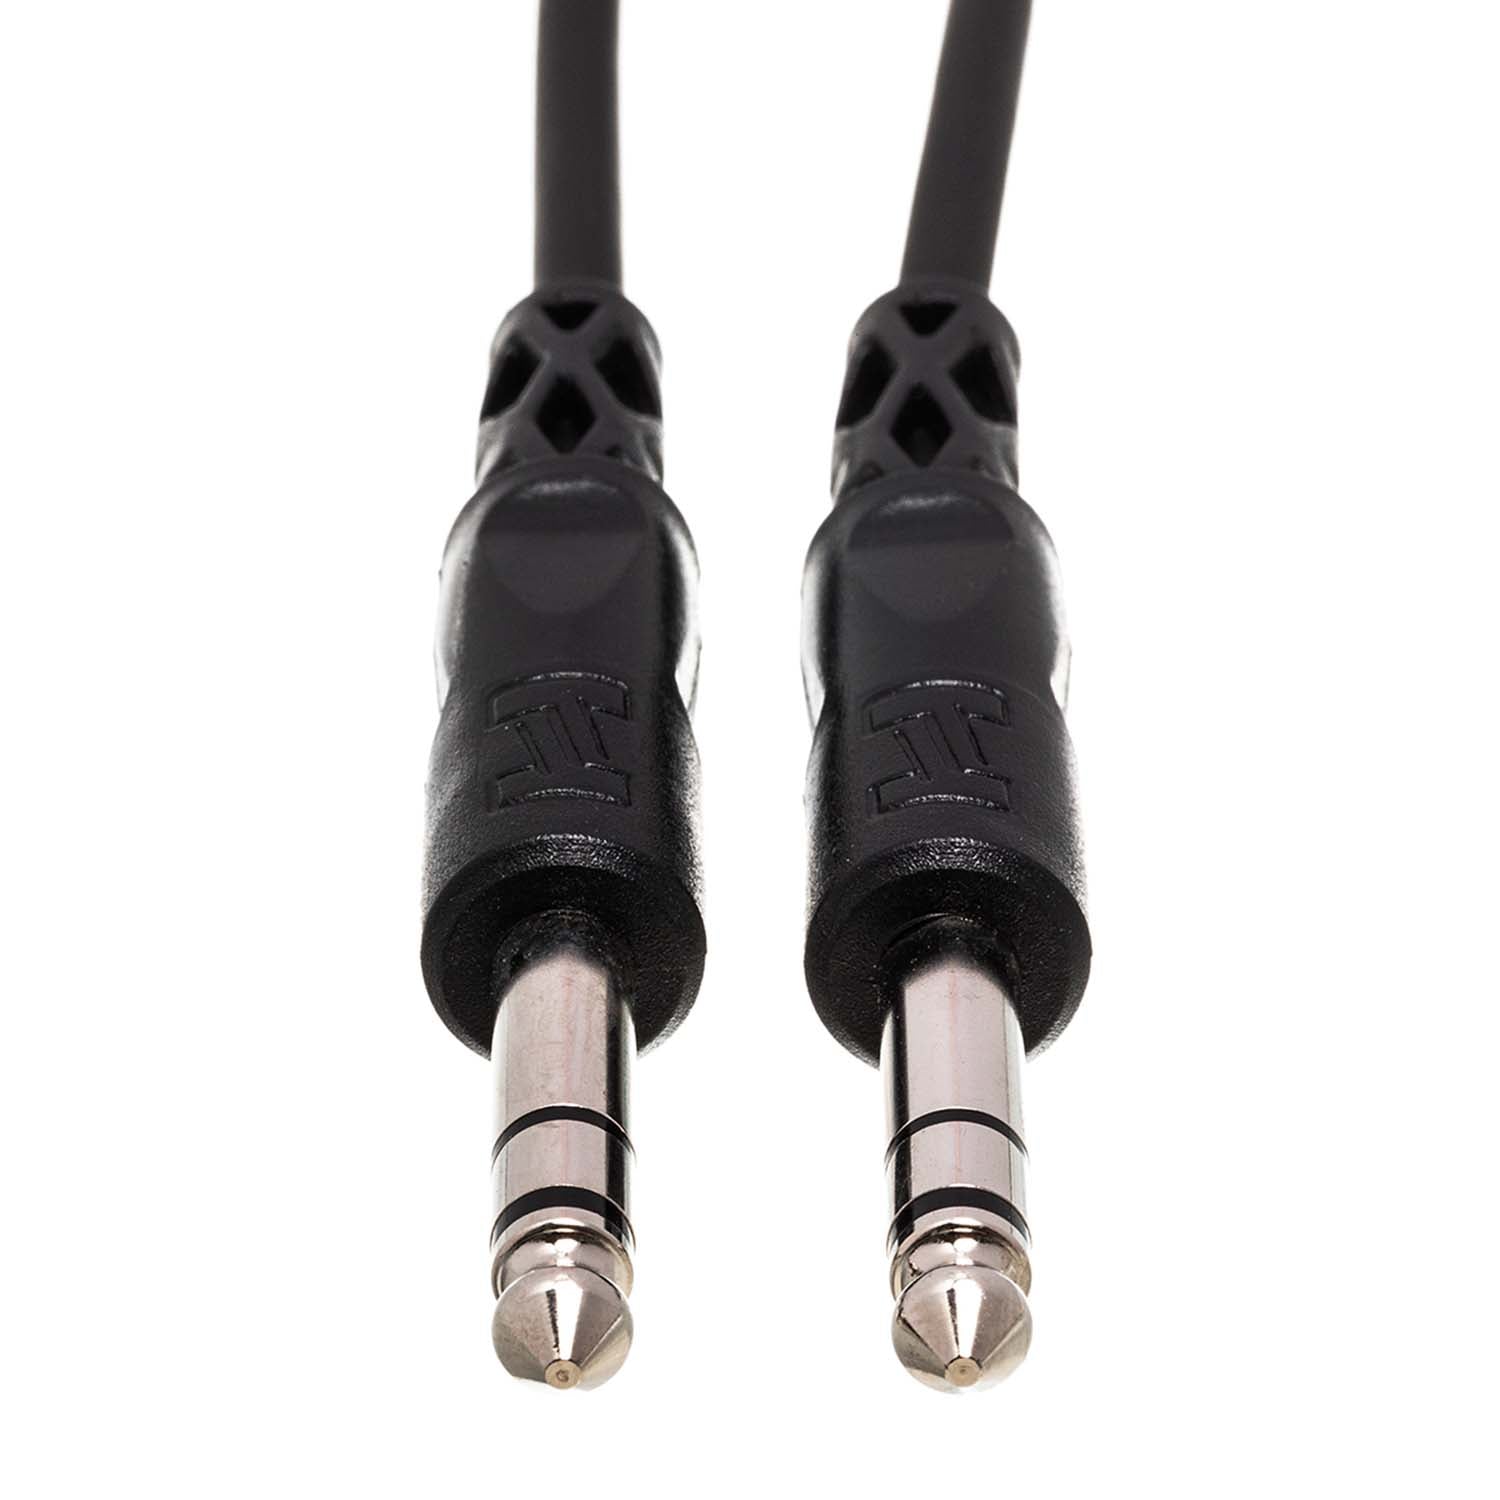 Hosa CSS-105 Balanced Interconnect Cable 1/4 in TRS to Same - 5 Feet - Hollywood DJ